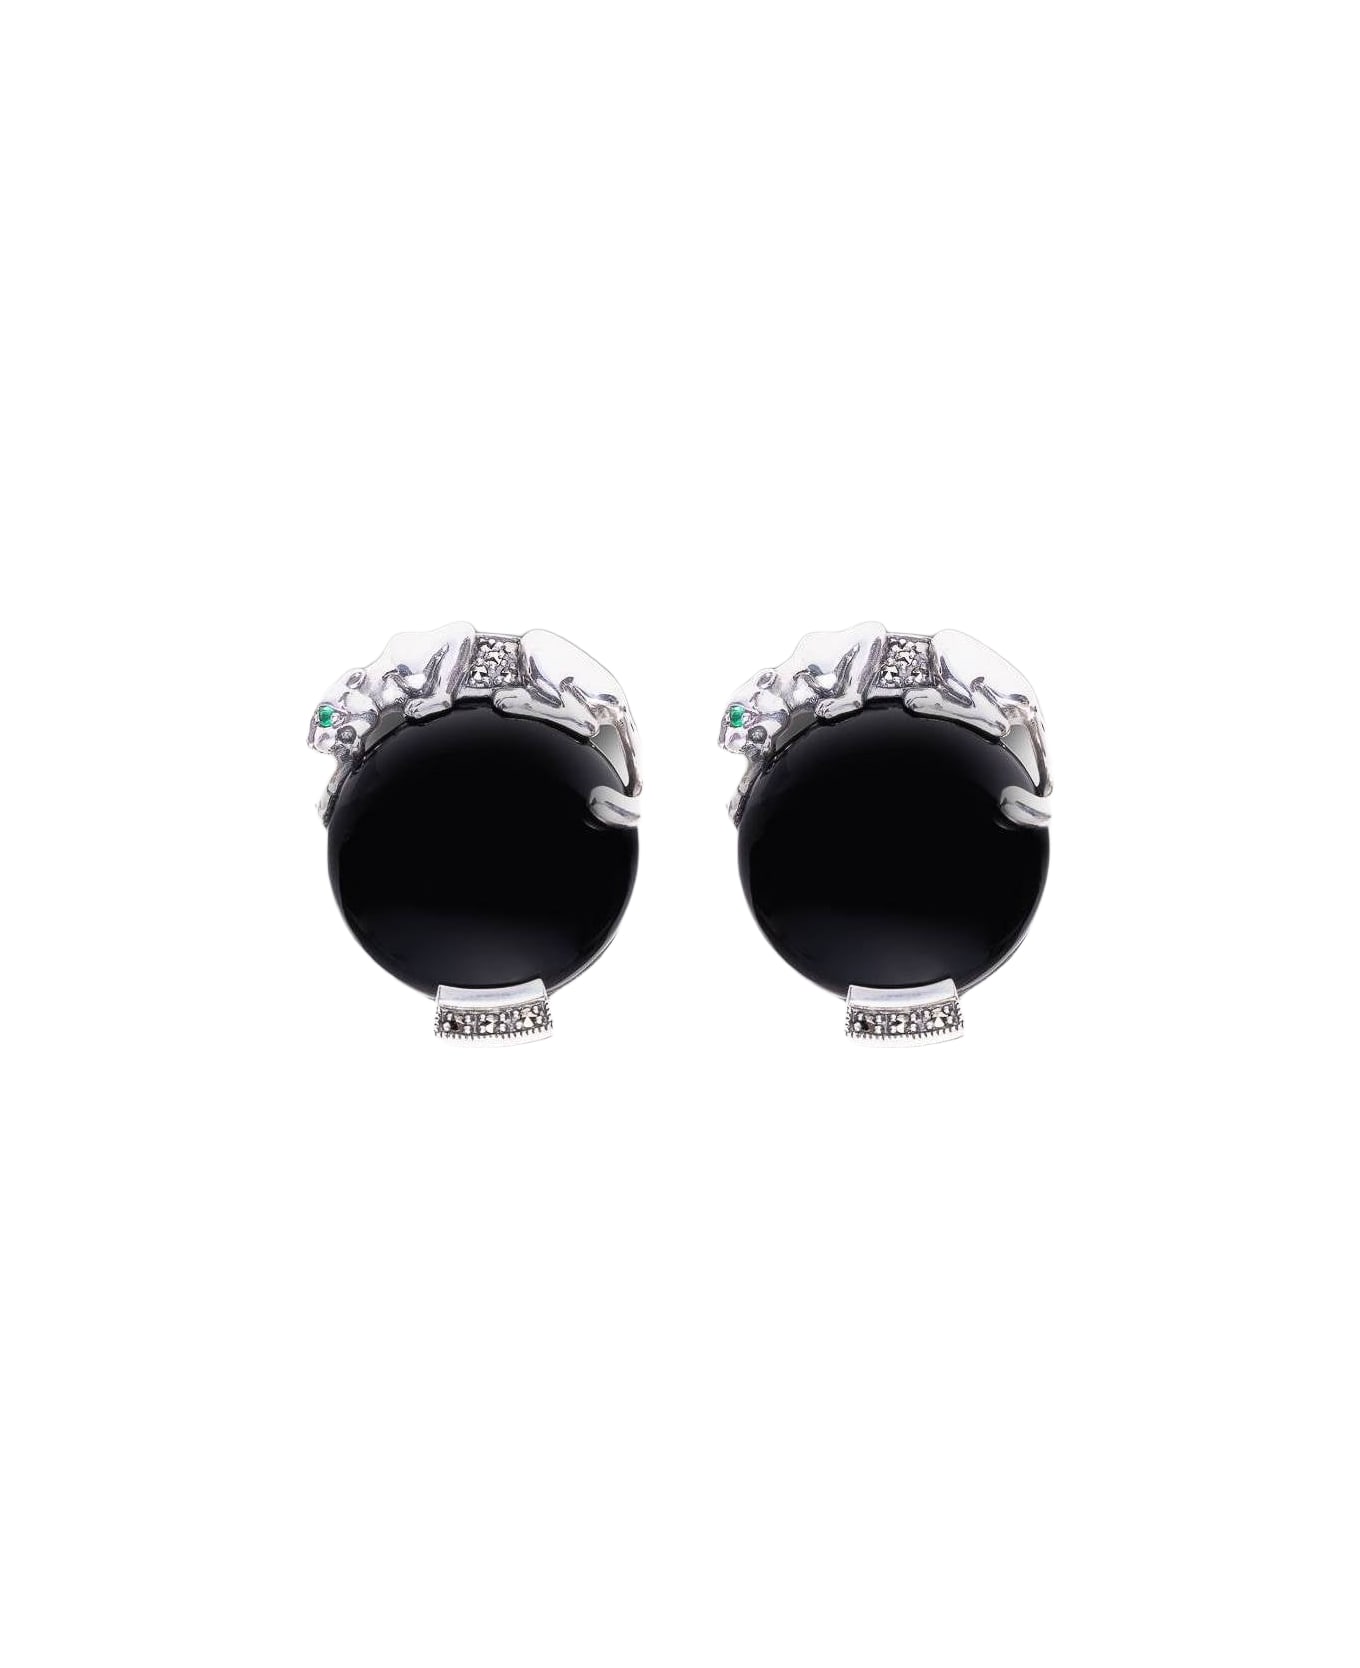 Larusmiani Silver And Onyx Cufflinks With Panther Design Cufflinks - Neutral